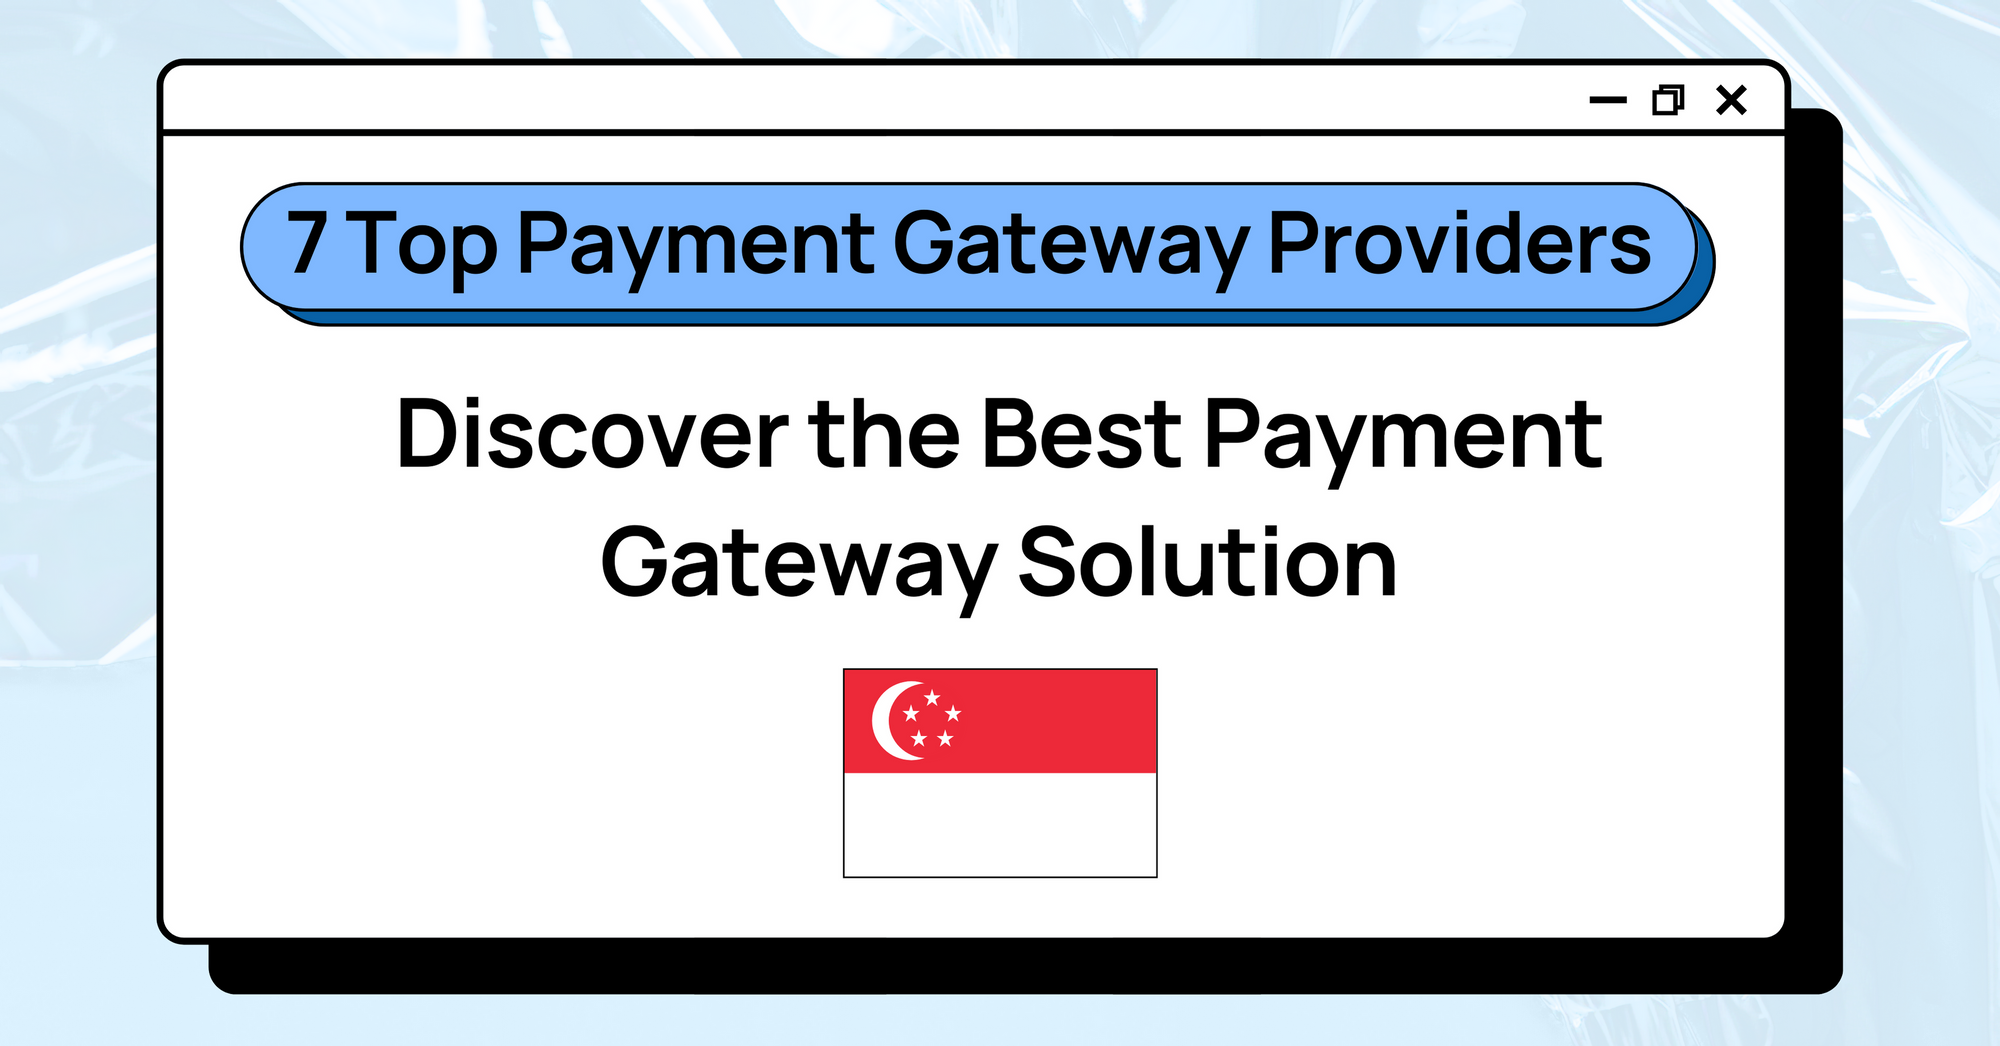 7 Top Payment Gateway Providers in Singapore: Discover the Best Payment Gateway Solution